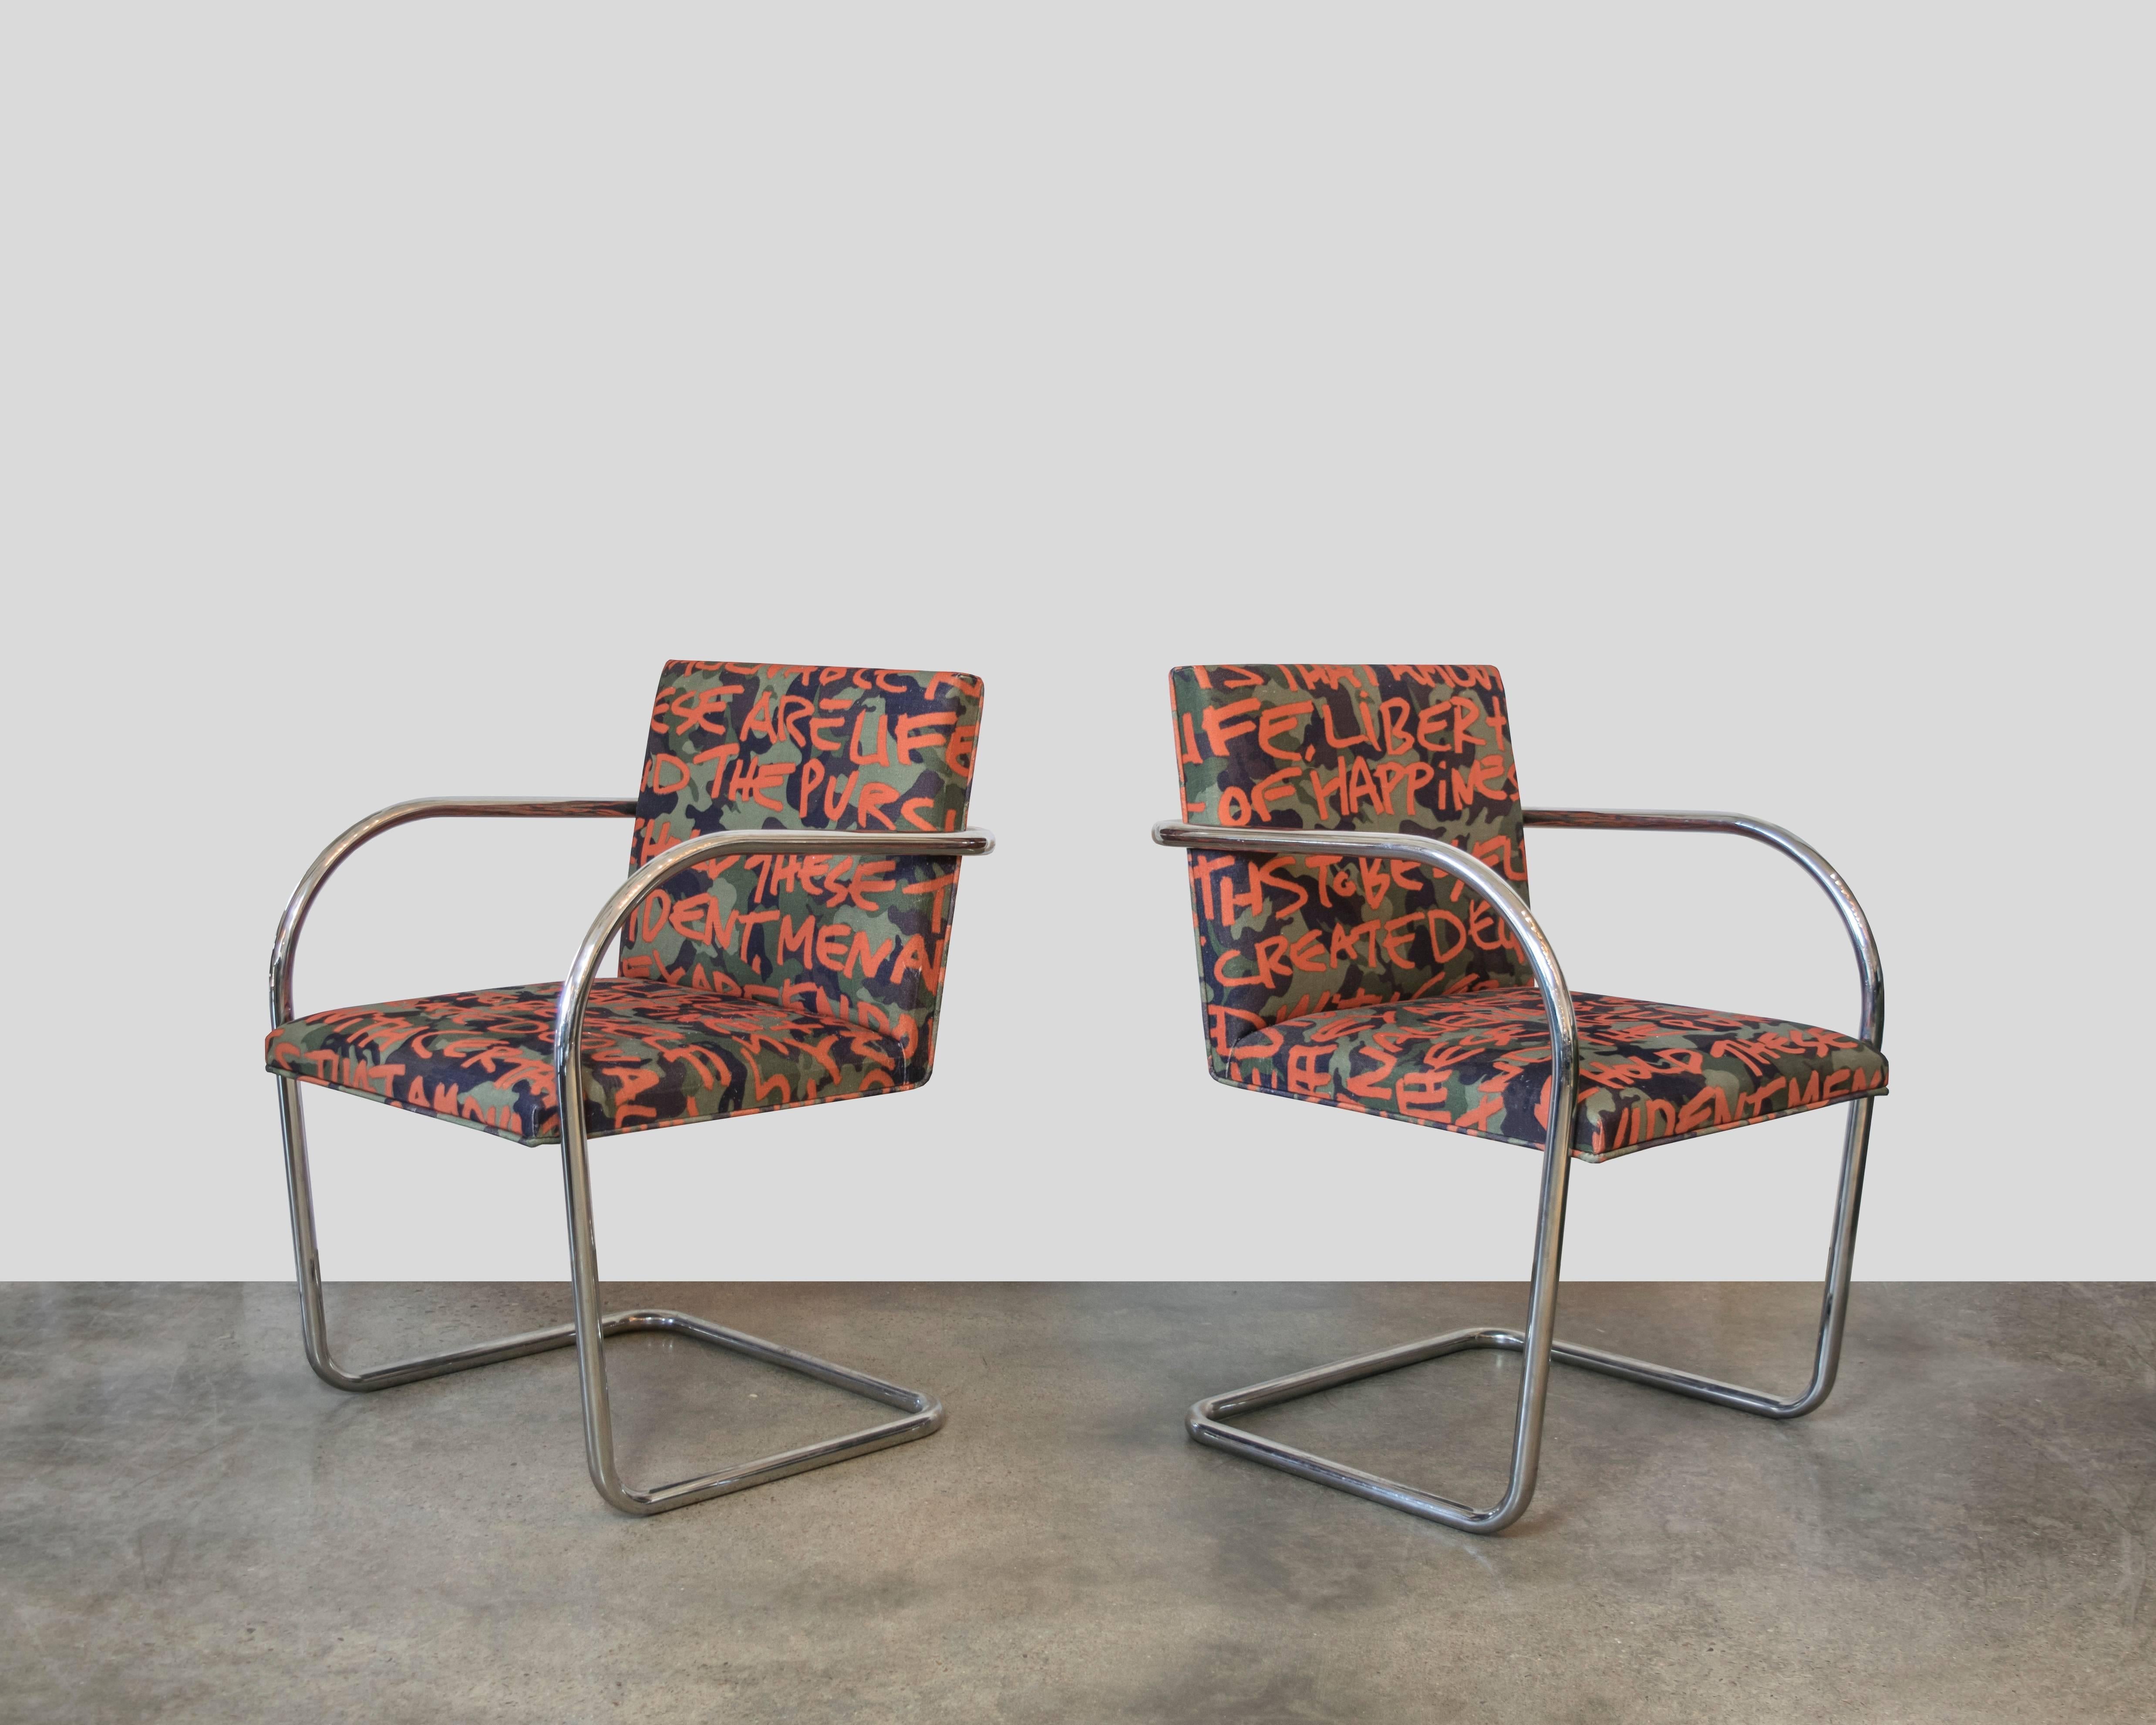 A fun set of Brno tubular chairs in custom Karl Lagerfeld fabric. The upholstery is an abstract of the Declaration of Independence. The fabric has a background of camouflage with bright orange lettering making these a standout piece and perfect for